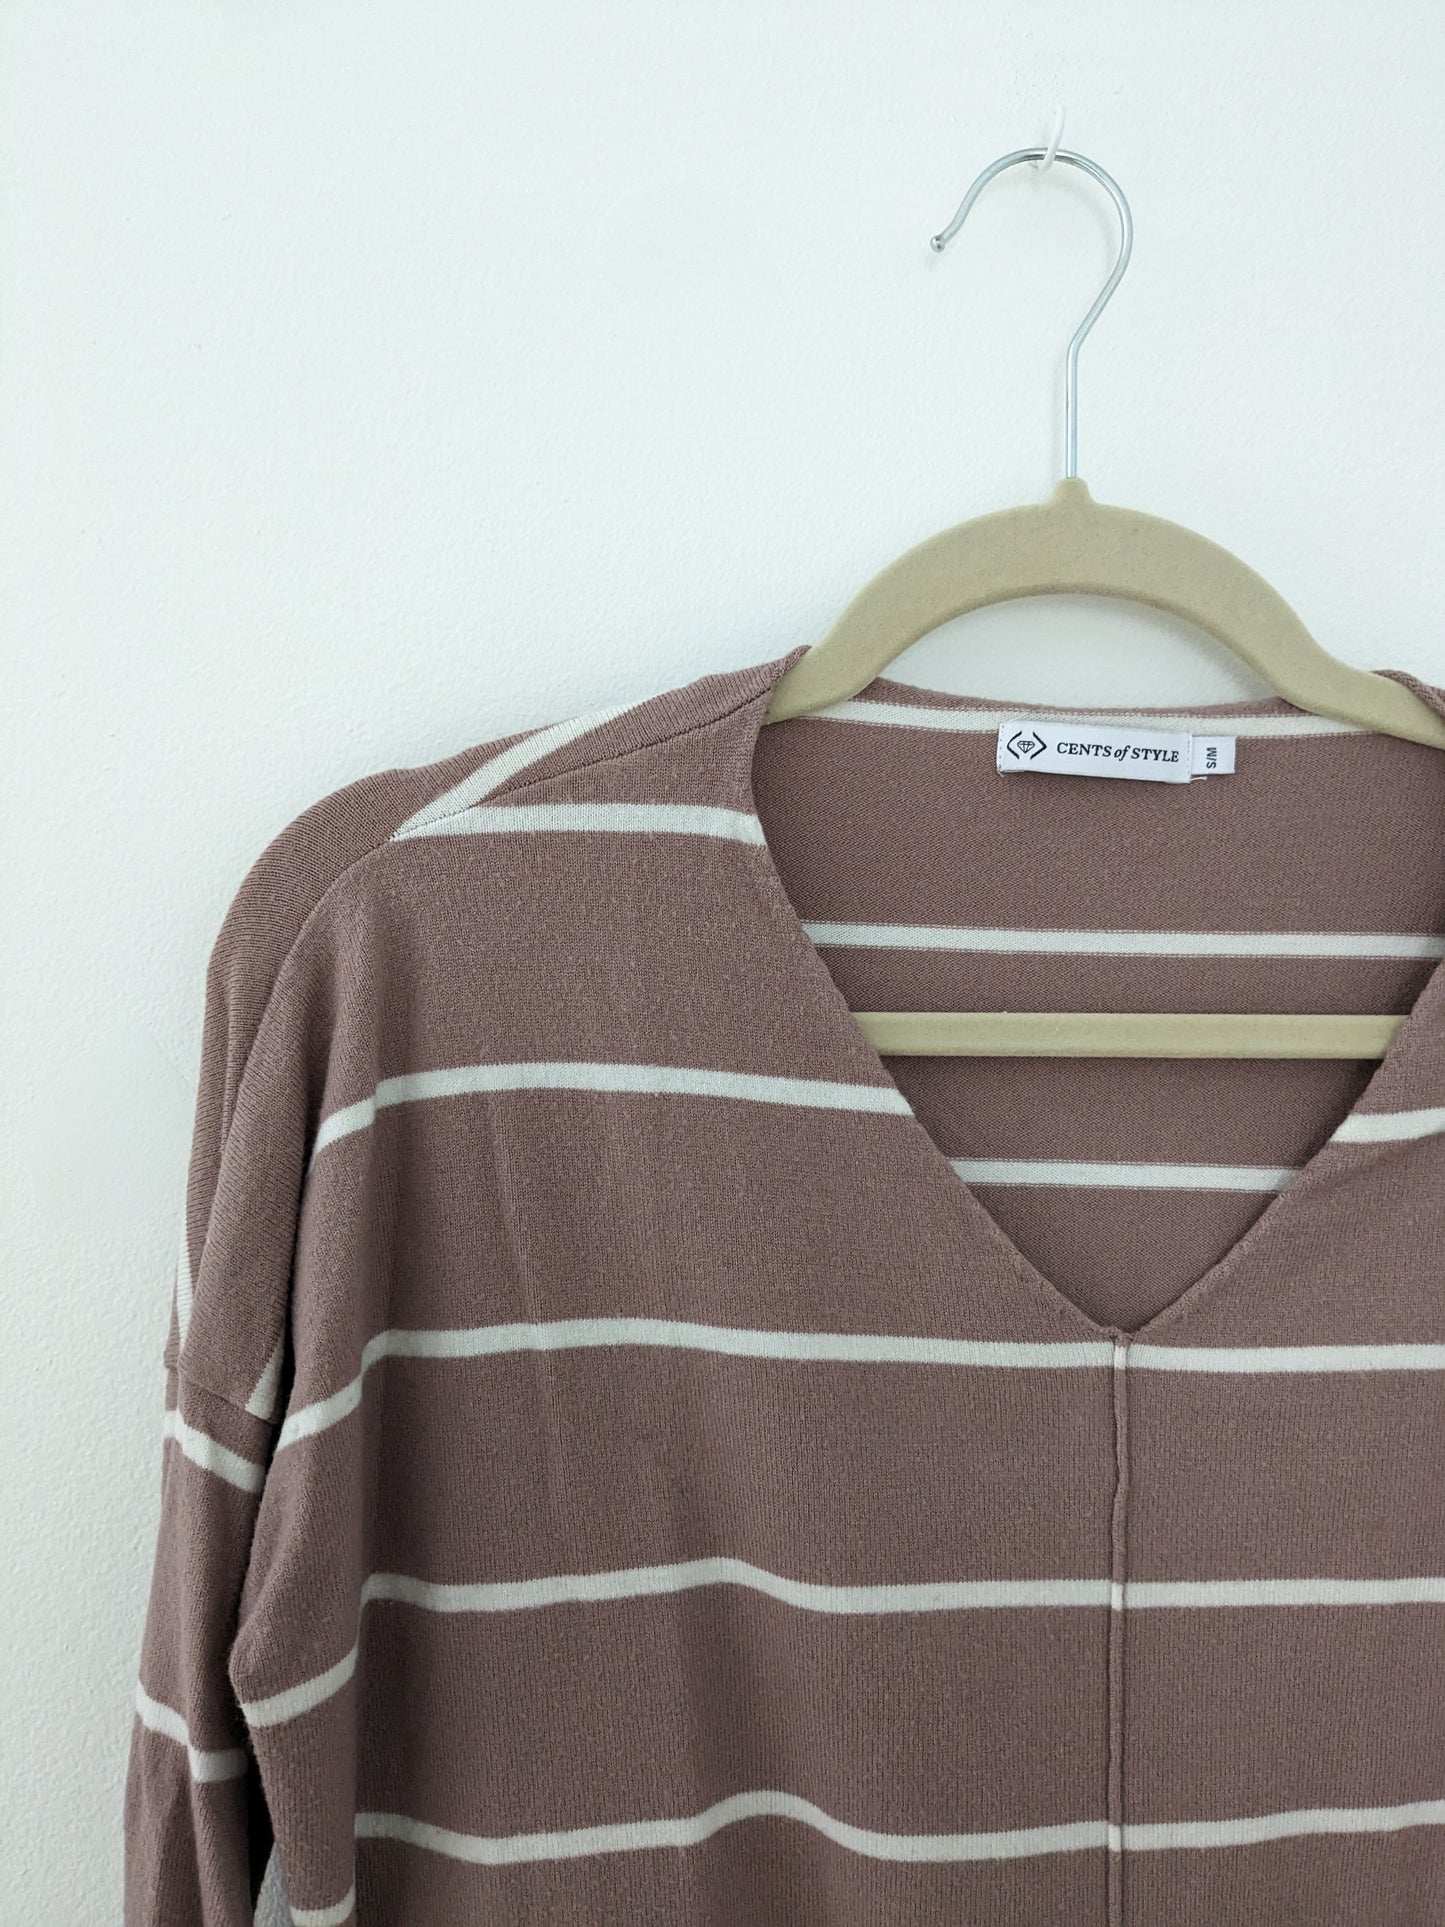 Cents of Style lavender striped v-neck sweater | Size S/M